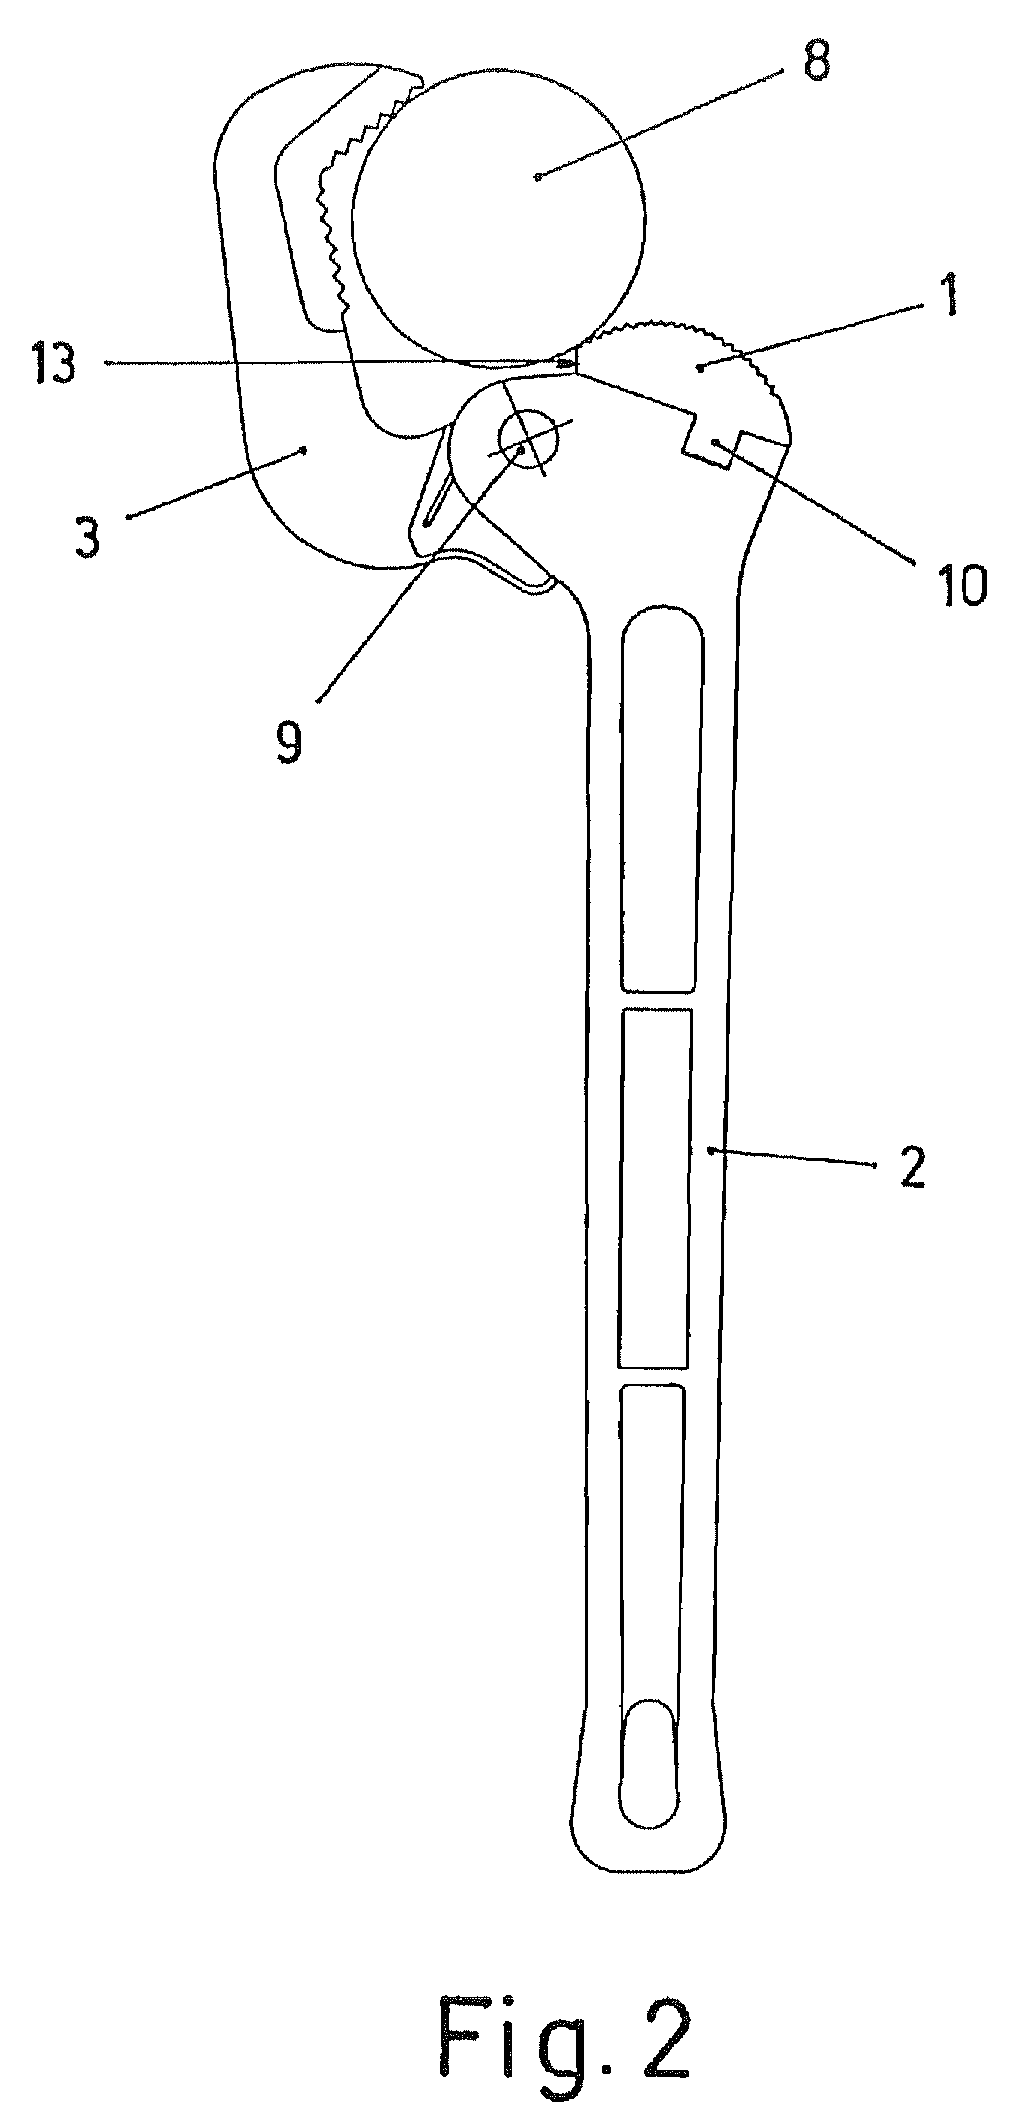 Manual wrench for actuating cylindrical elements